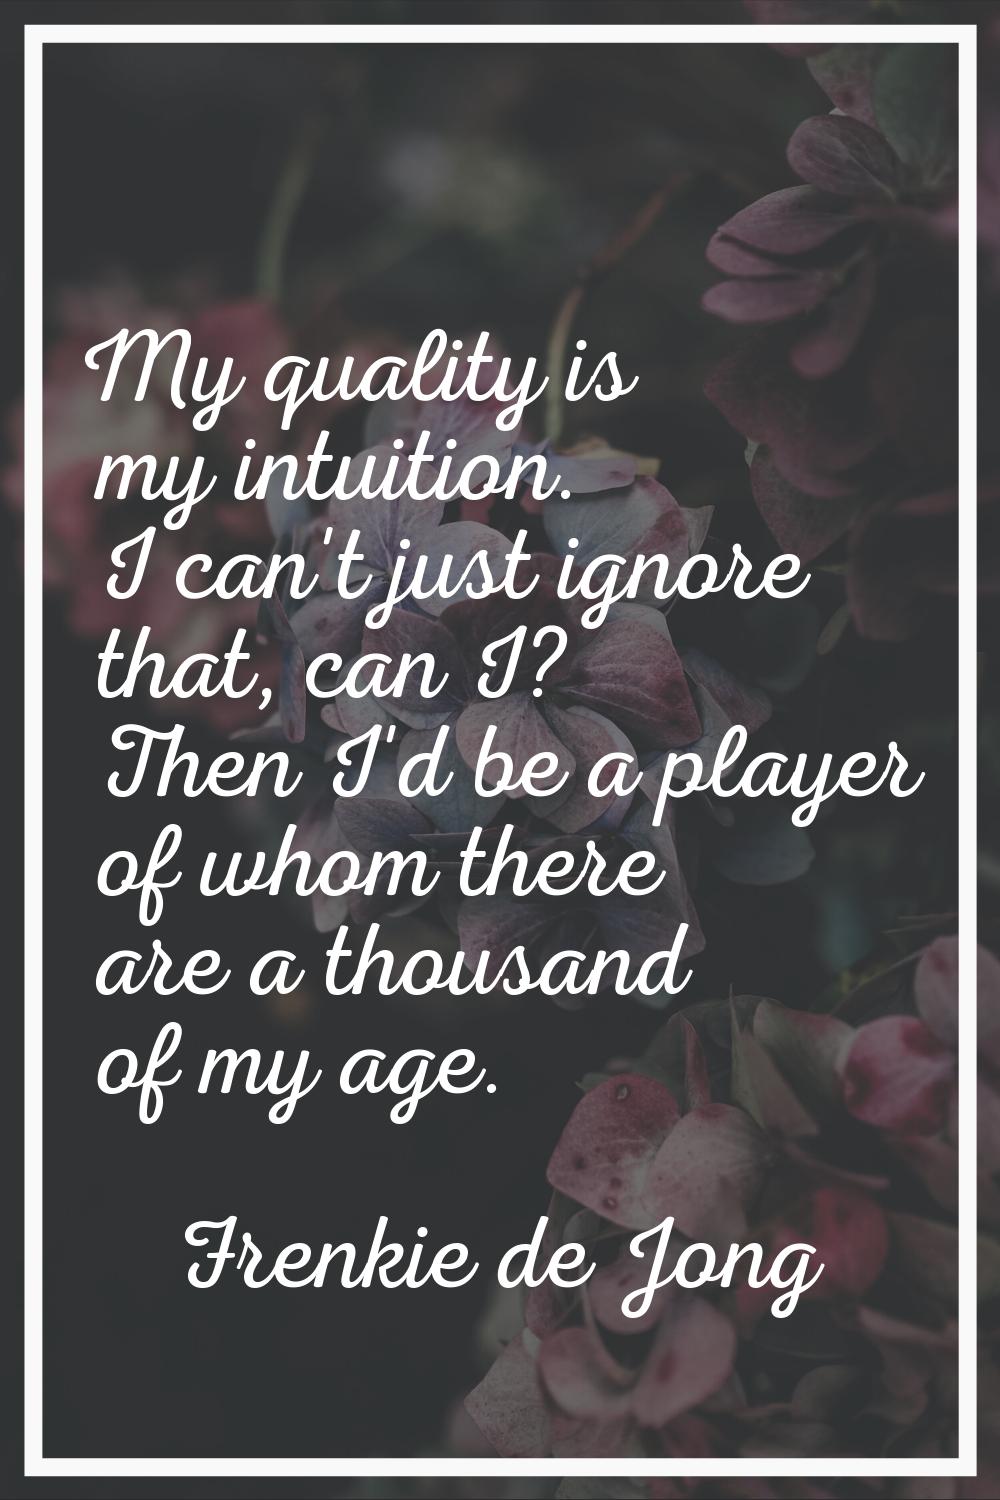 My quality is my intuition. I can't just ignore that, can I? Then I'd be a player of whom there are